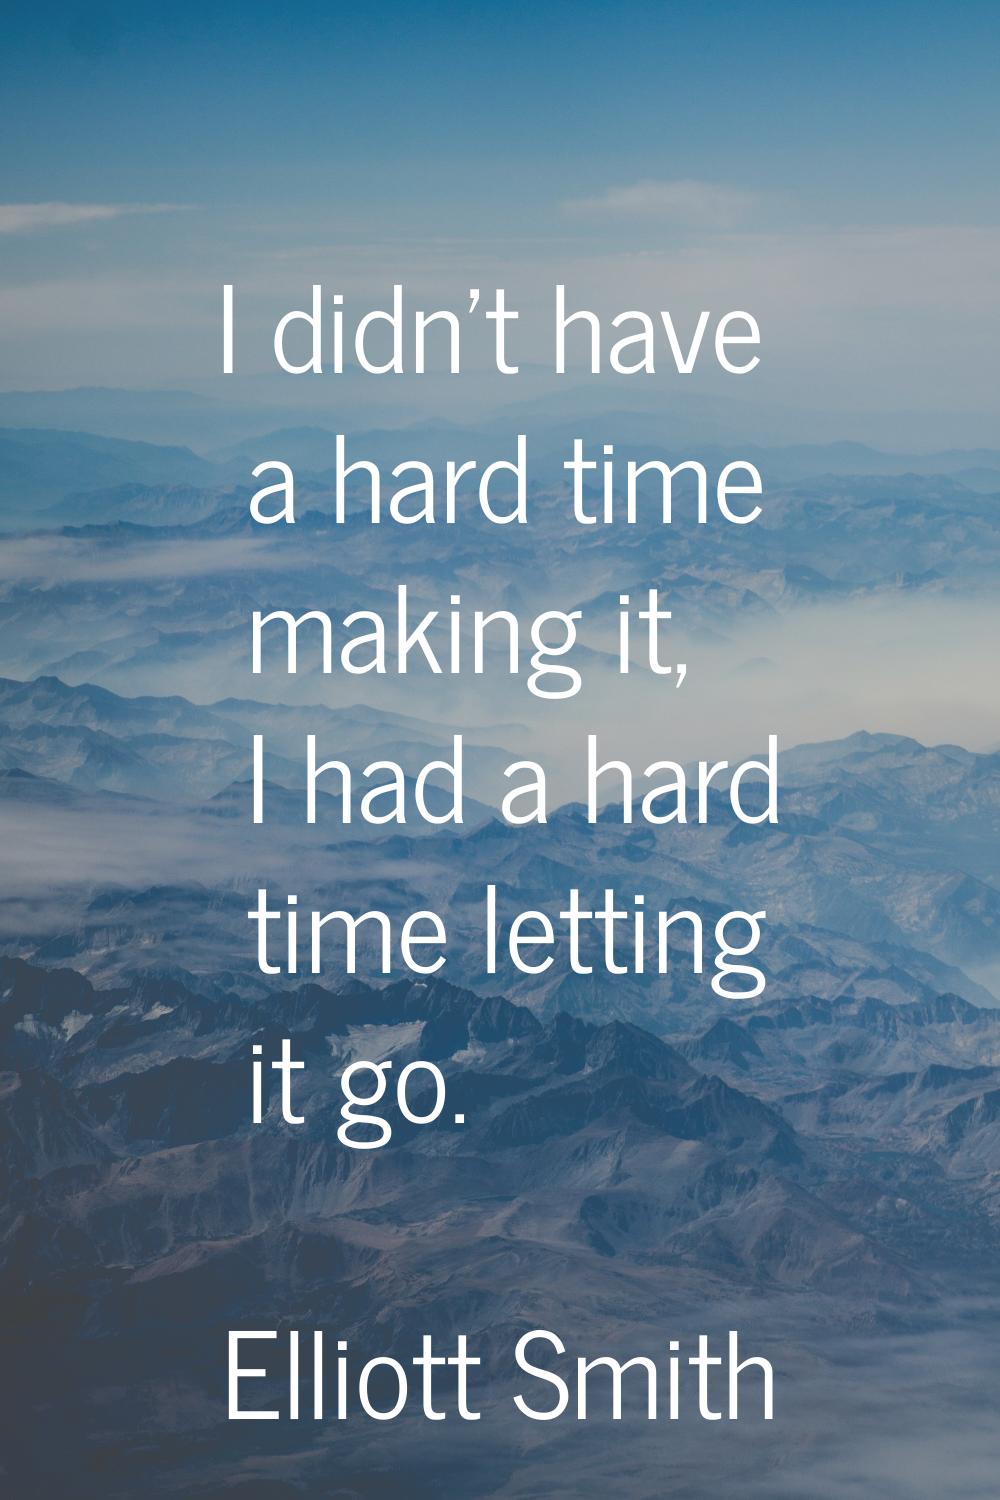 I didn't have a hard time making it, I had a hard time letting it go.